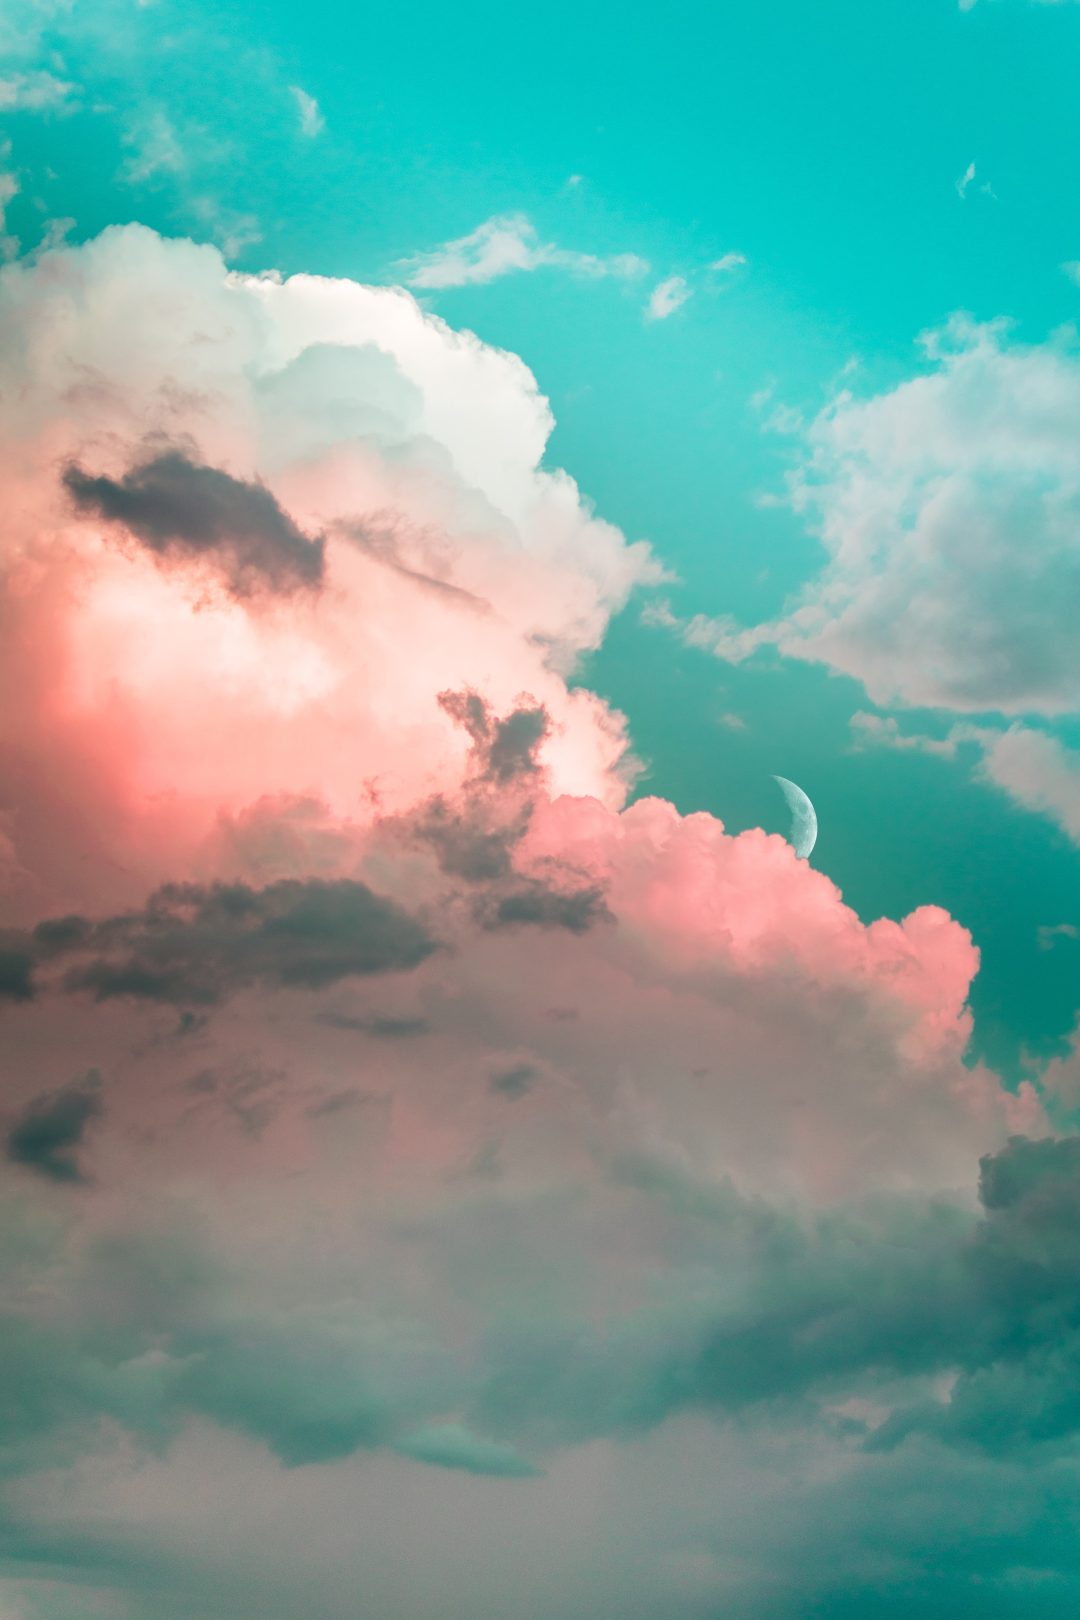 Aesthetic Cloud Wallpaper For iPhone (Free Download!)